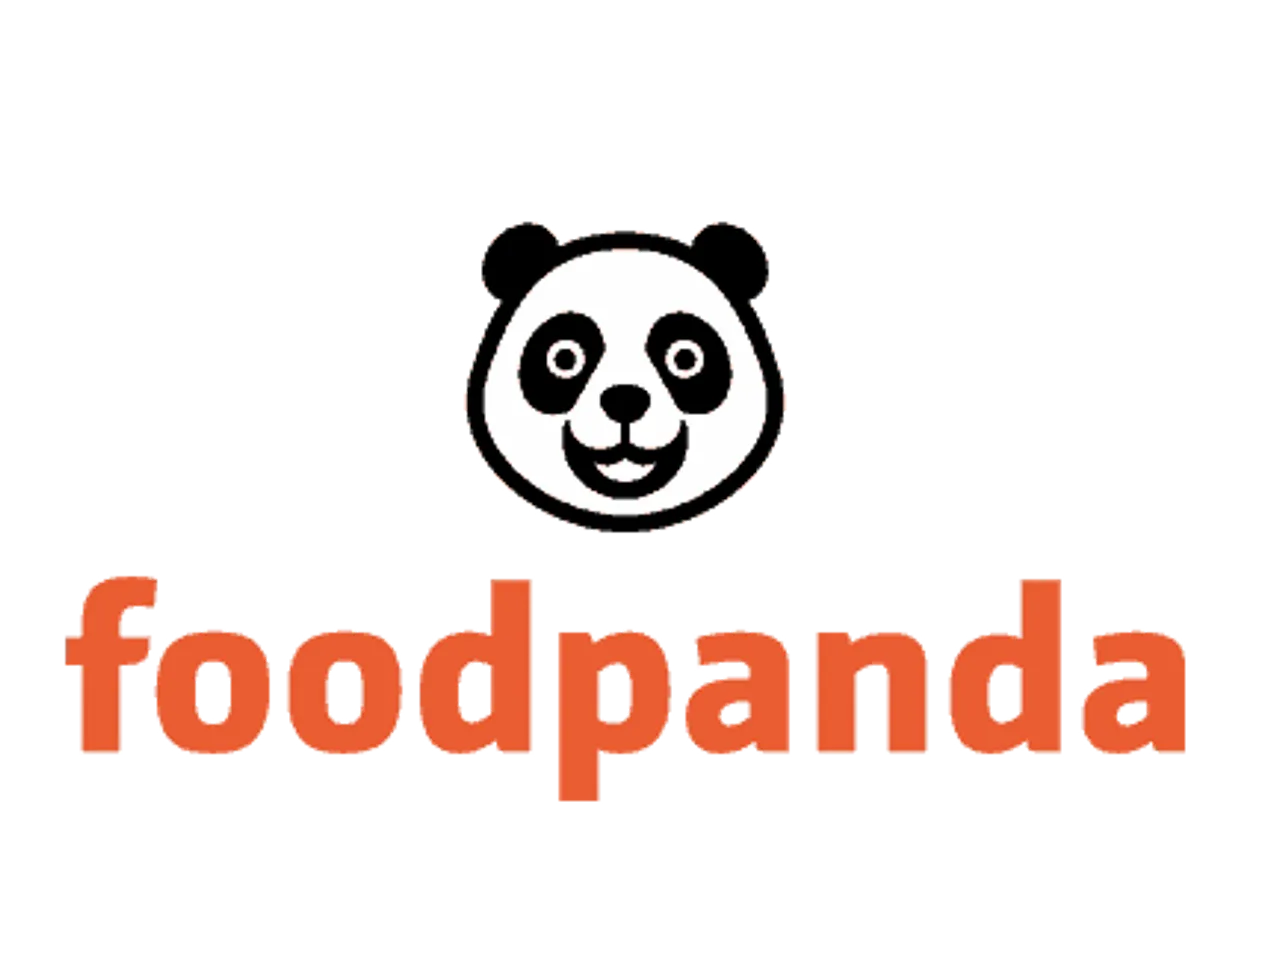 foodpanda lends a generous hand in support of Chennai flood victims